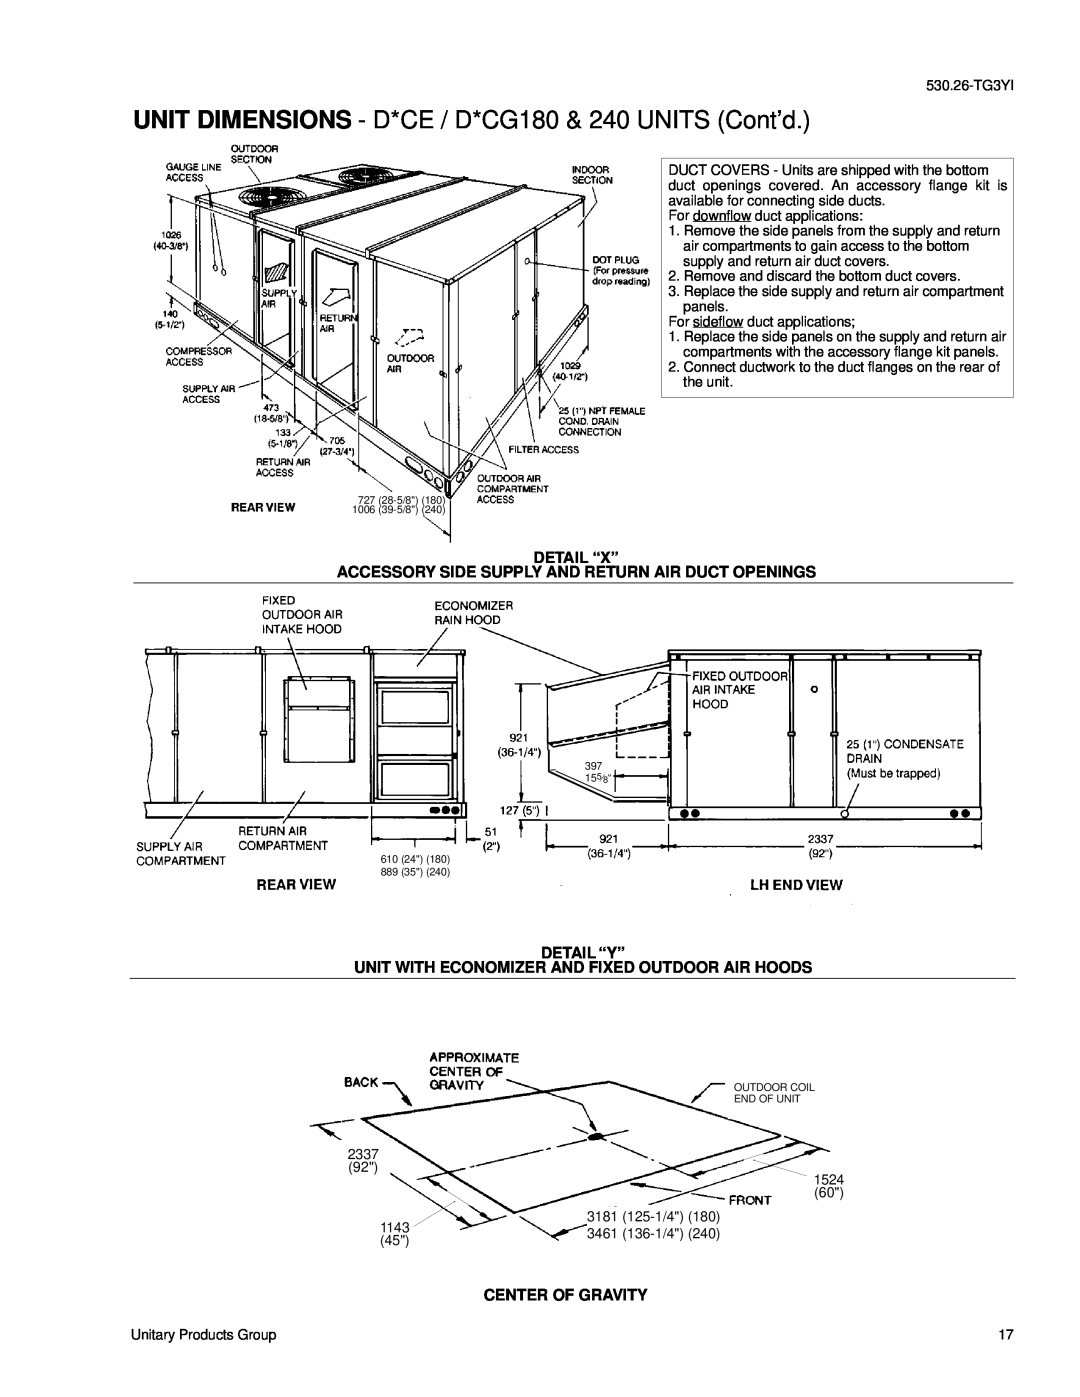 York D3CG, D3CE manual Detail “X”, Detail “Y”, Unit With Economizer And Fixed Outdoor Air Hoods, Center Of Gravity 